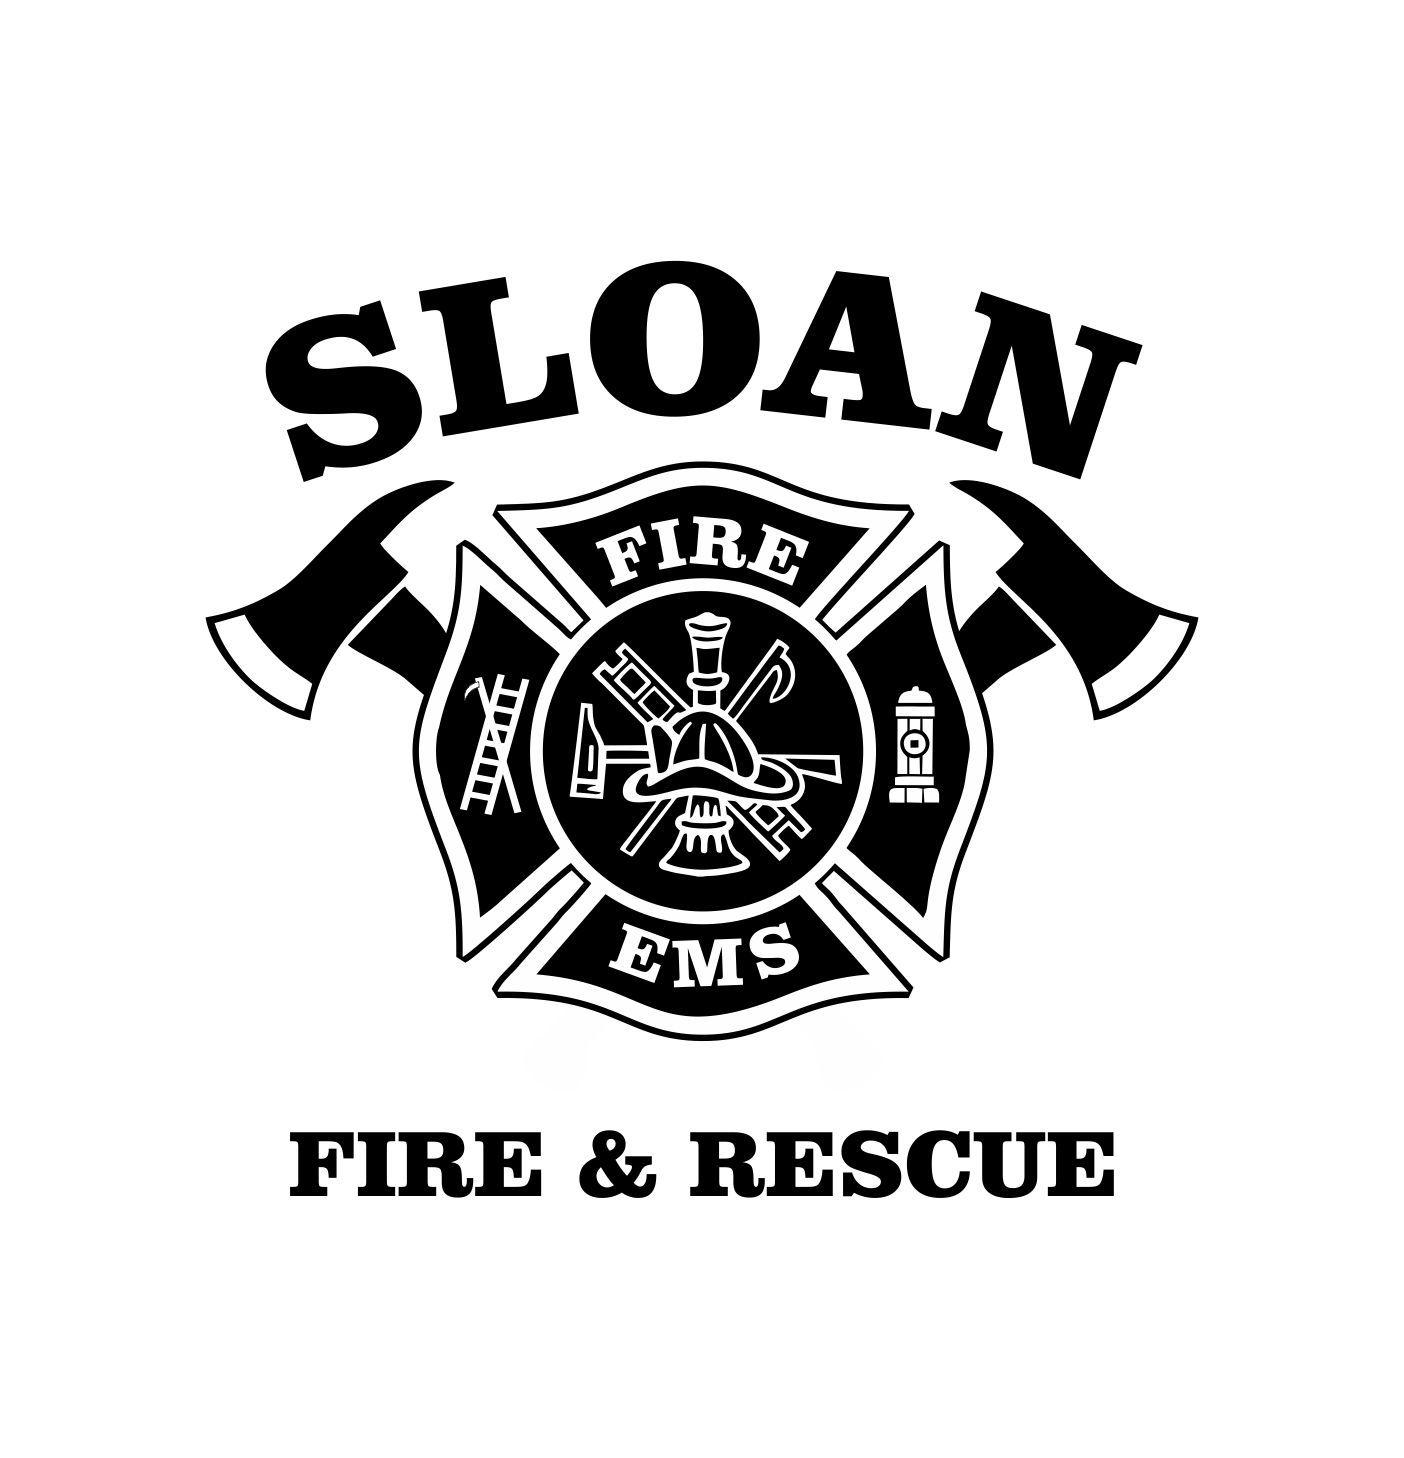 Wall of Fame Logo - Sloan Fire Department | Wall of Fame